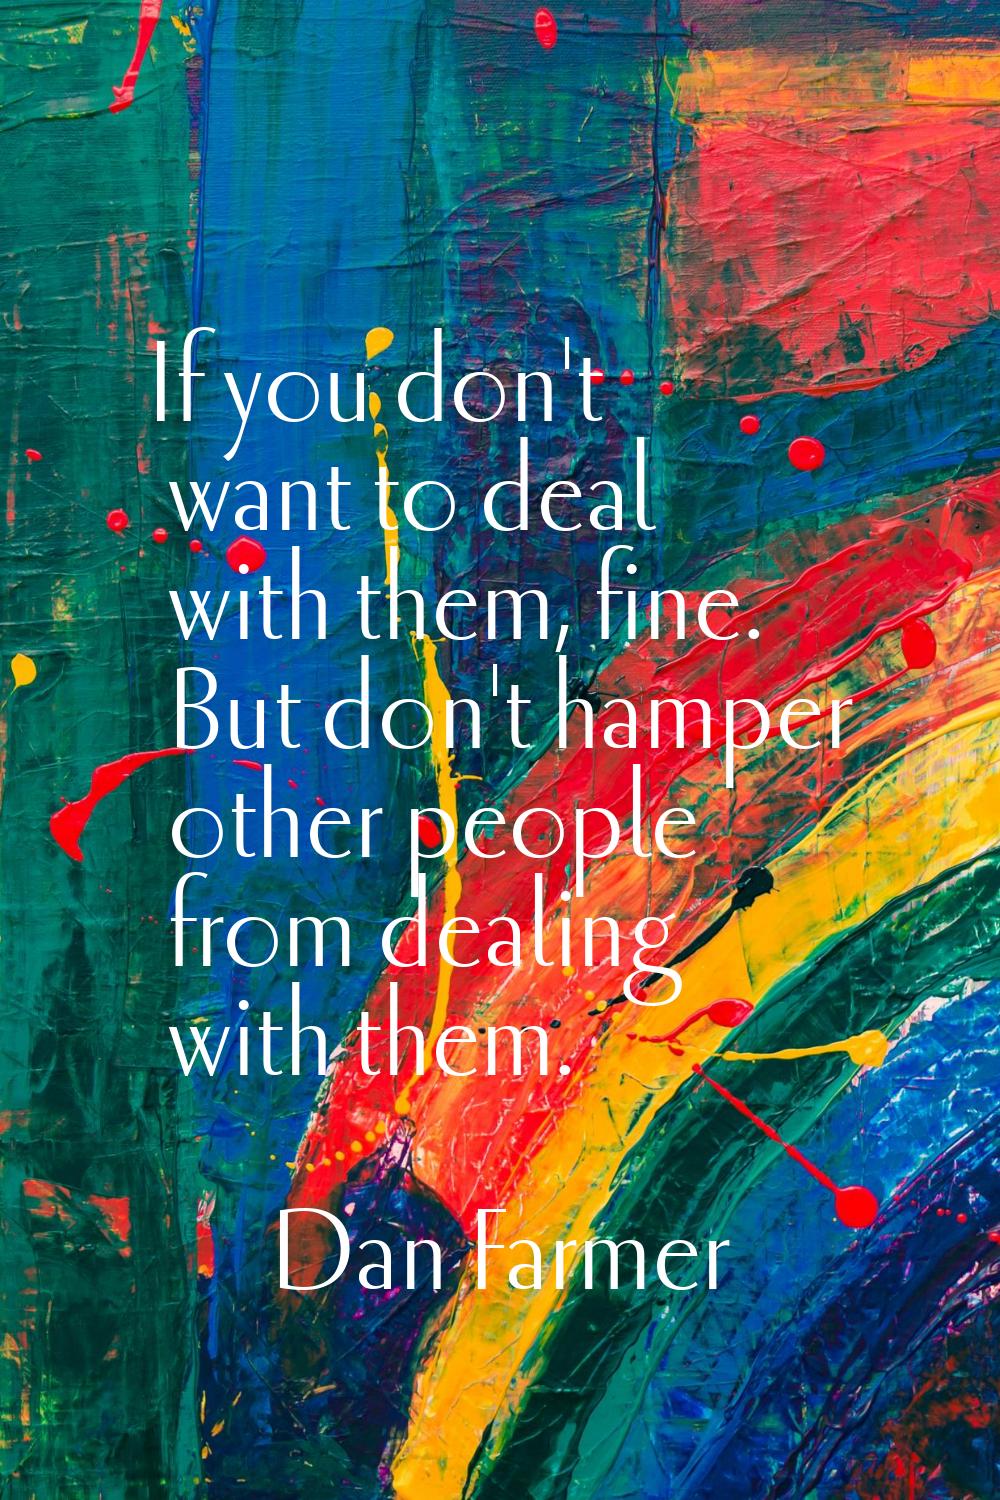 If you don't want to deal with them, fine. But don't hamper other people from dealing with them.